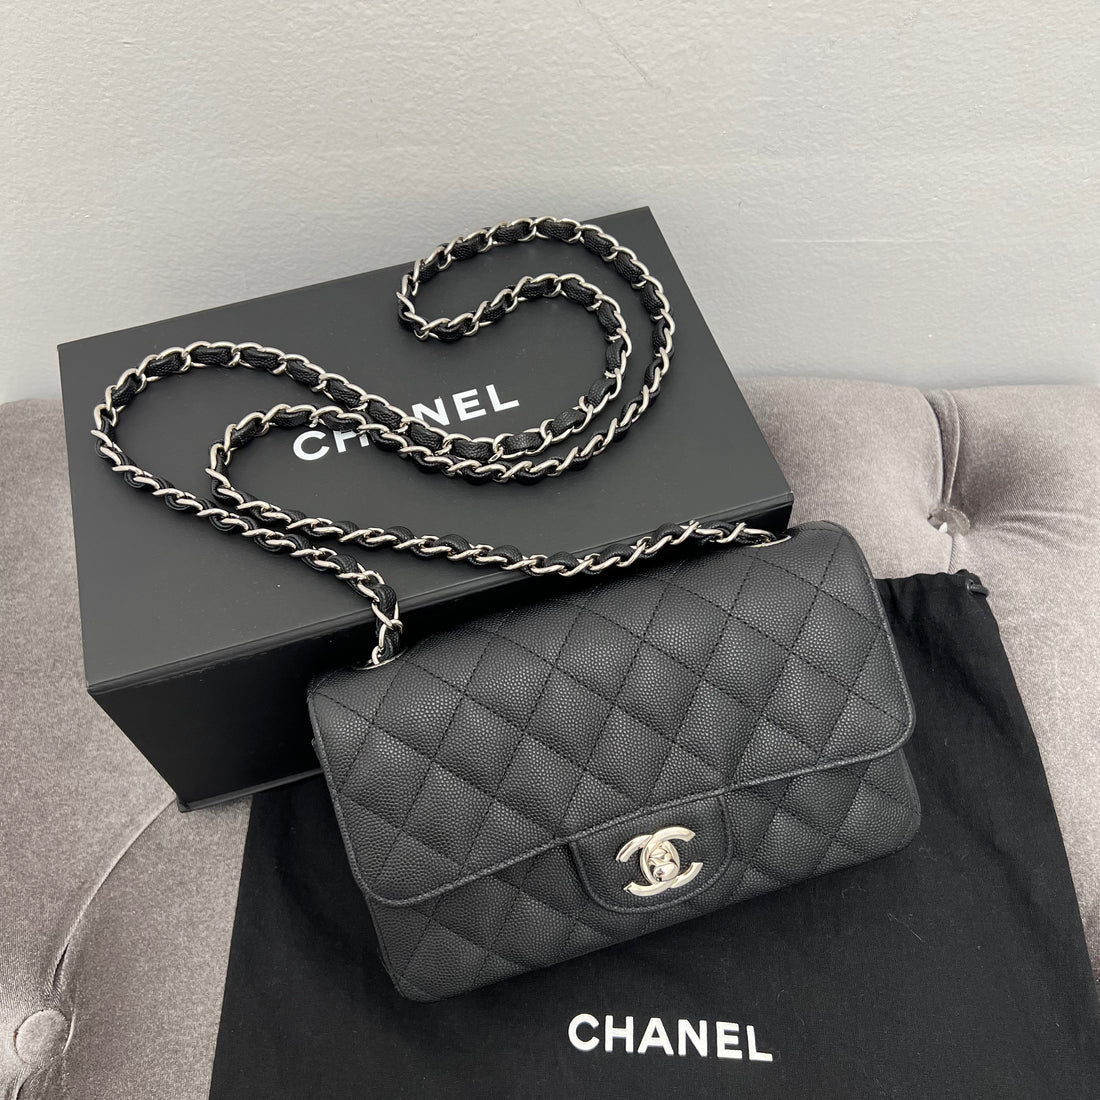 The Chanel Quilted Box Set with 4 Mini Bags